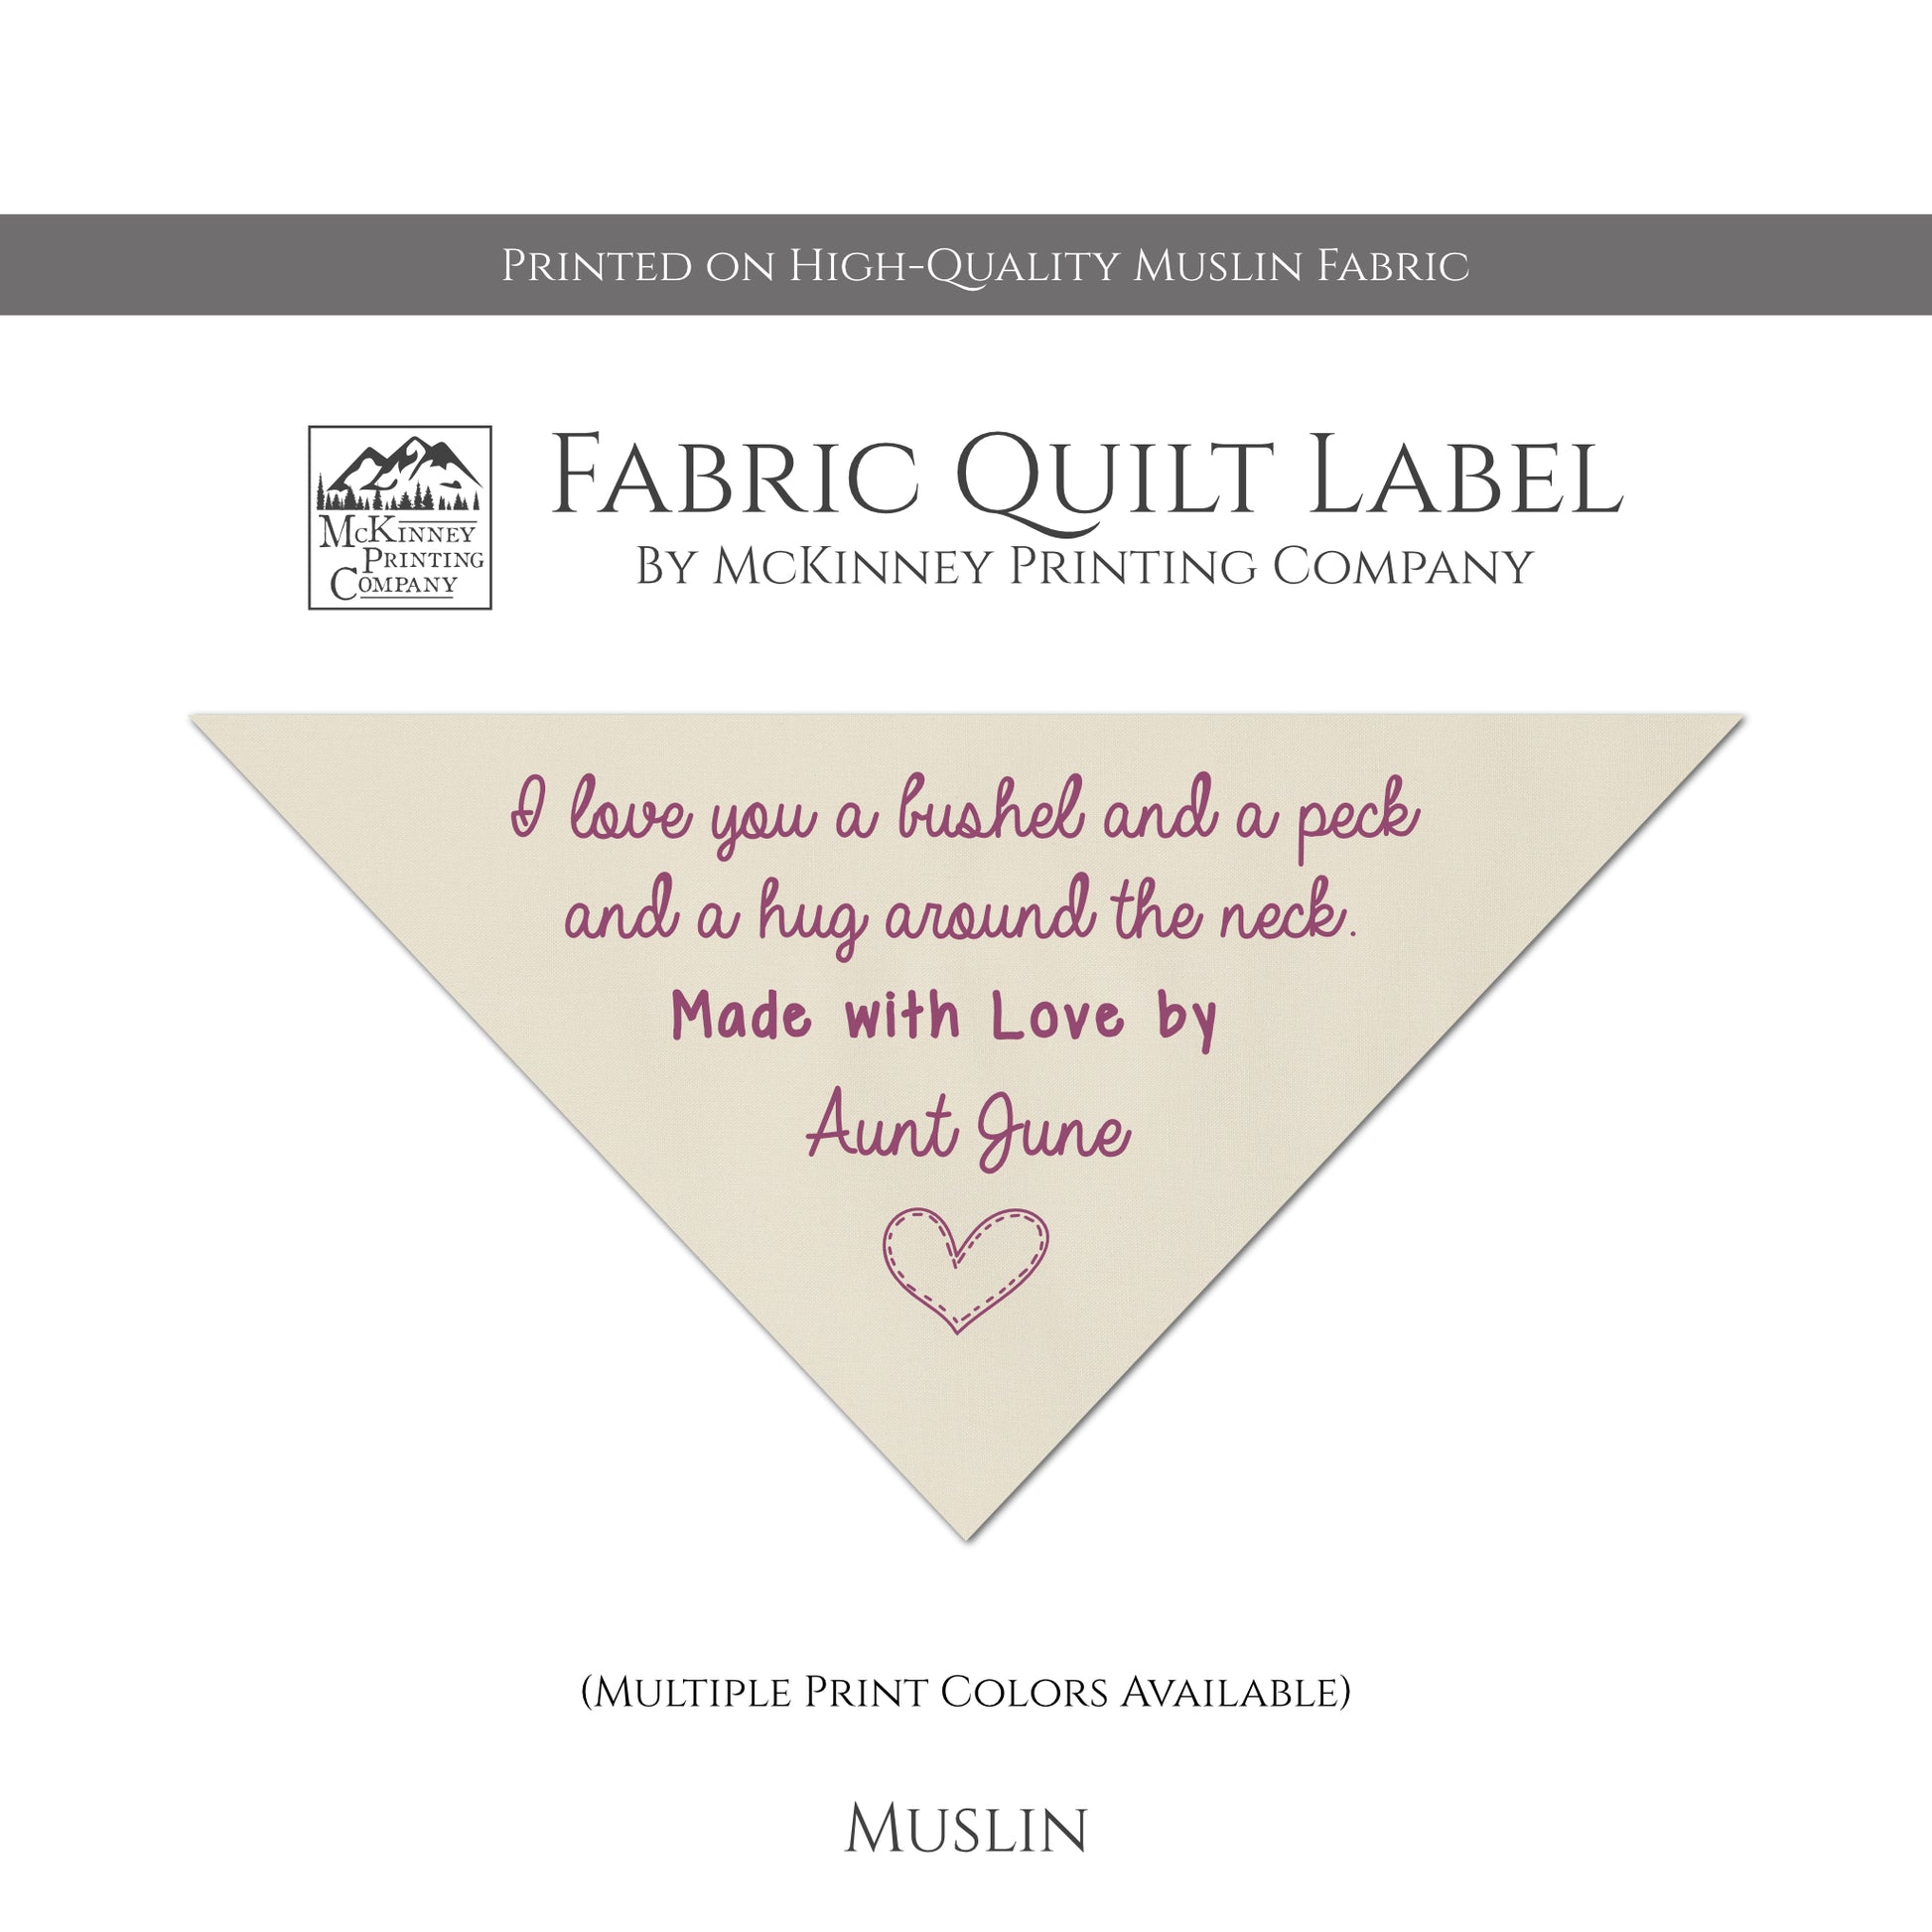 Corner Quilt Label - Triangle - I Love you a bushel and a peck and a hug around the neck - Made with Love - Custom Name - Muslin